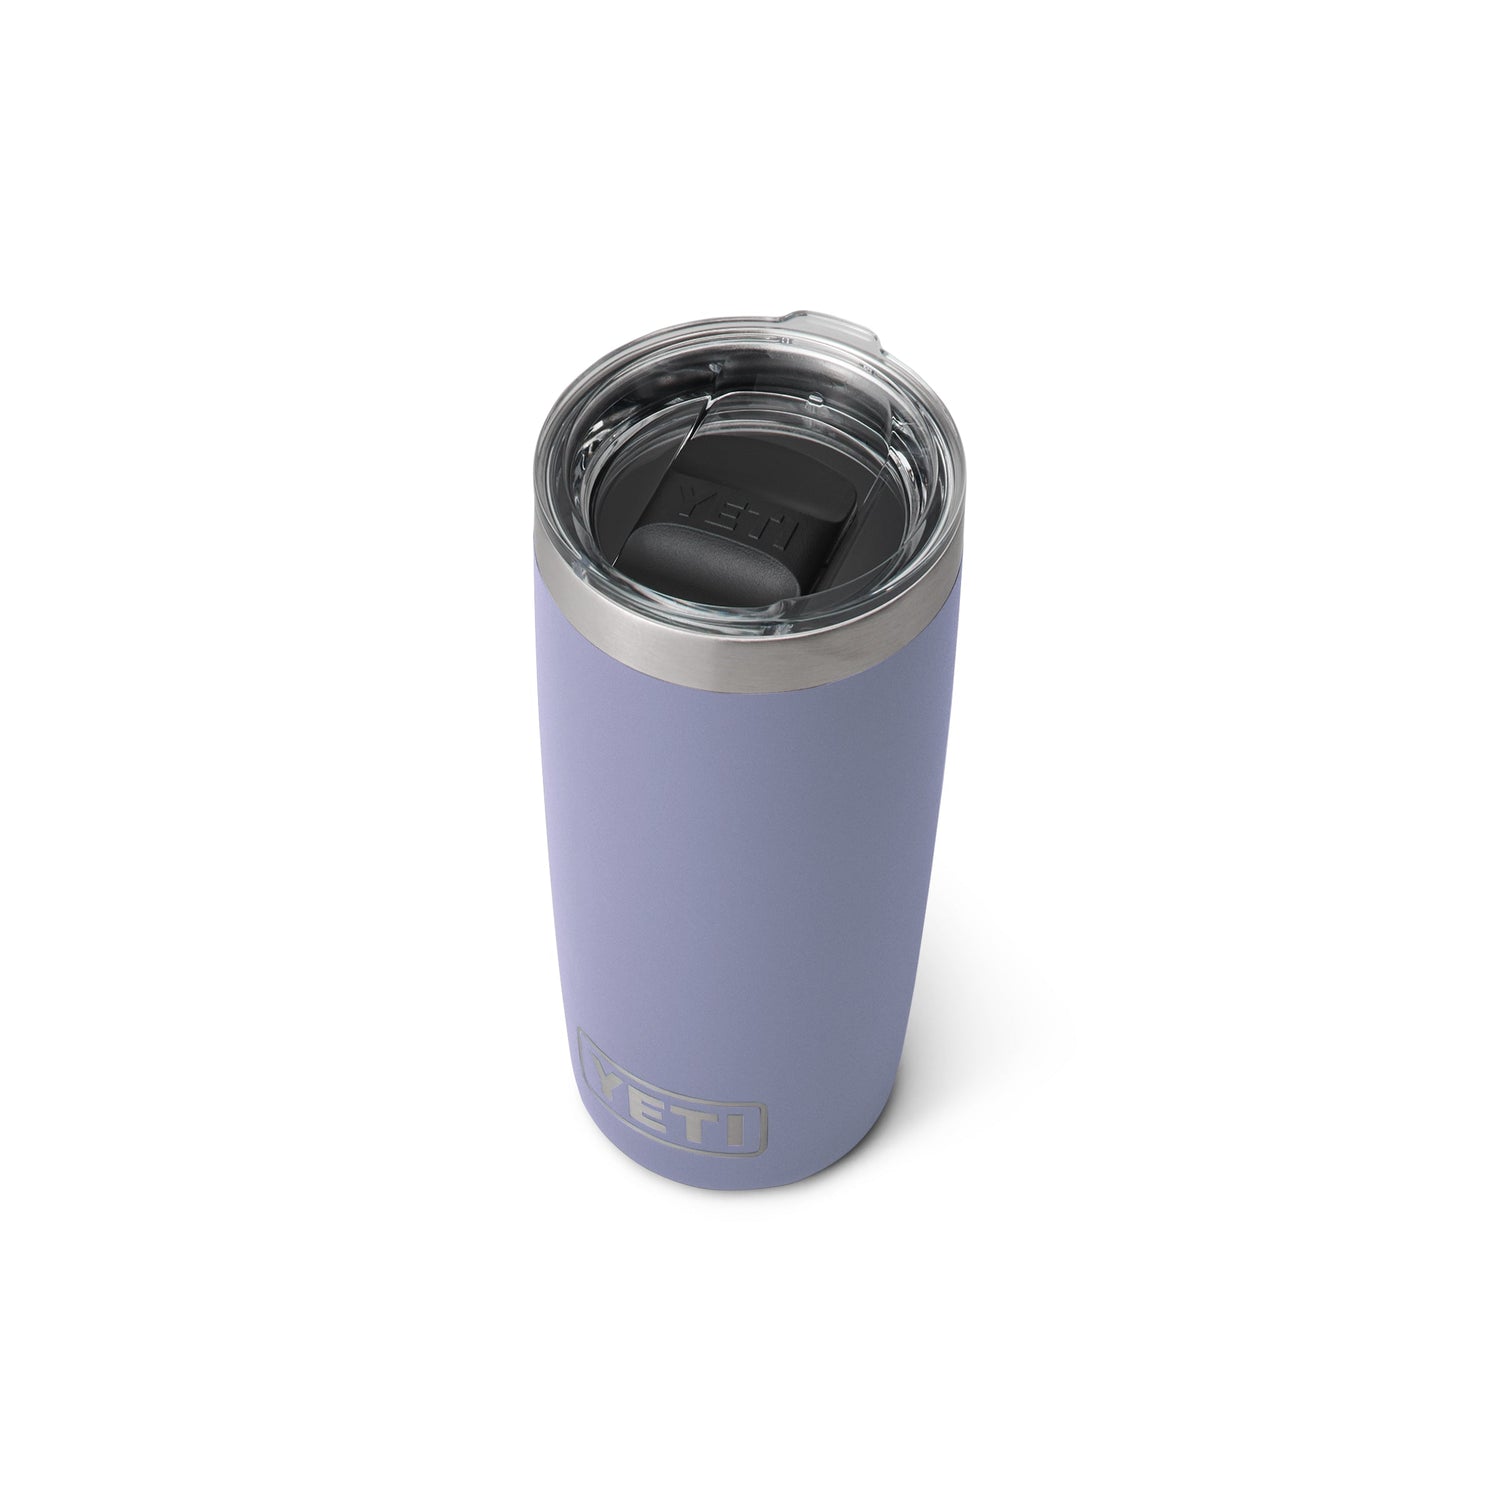 Yeti Tumbler 10oz (295ml) with Magslider Lid-Coolers & Drinkware-Yeti-Cosmic Lilac-Fishing Station